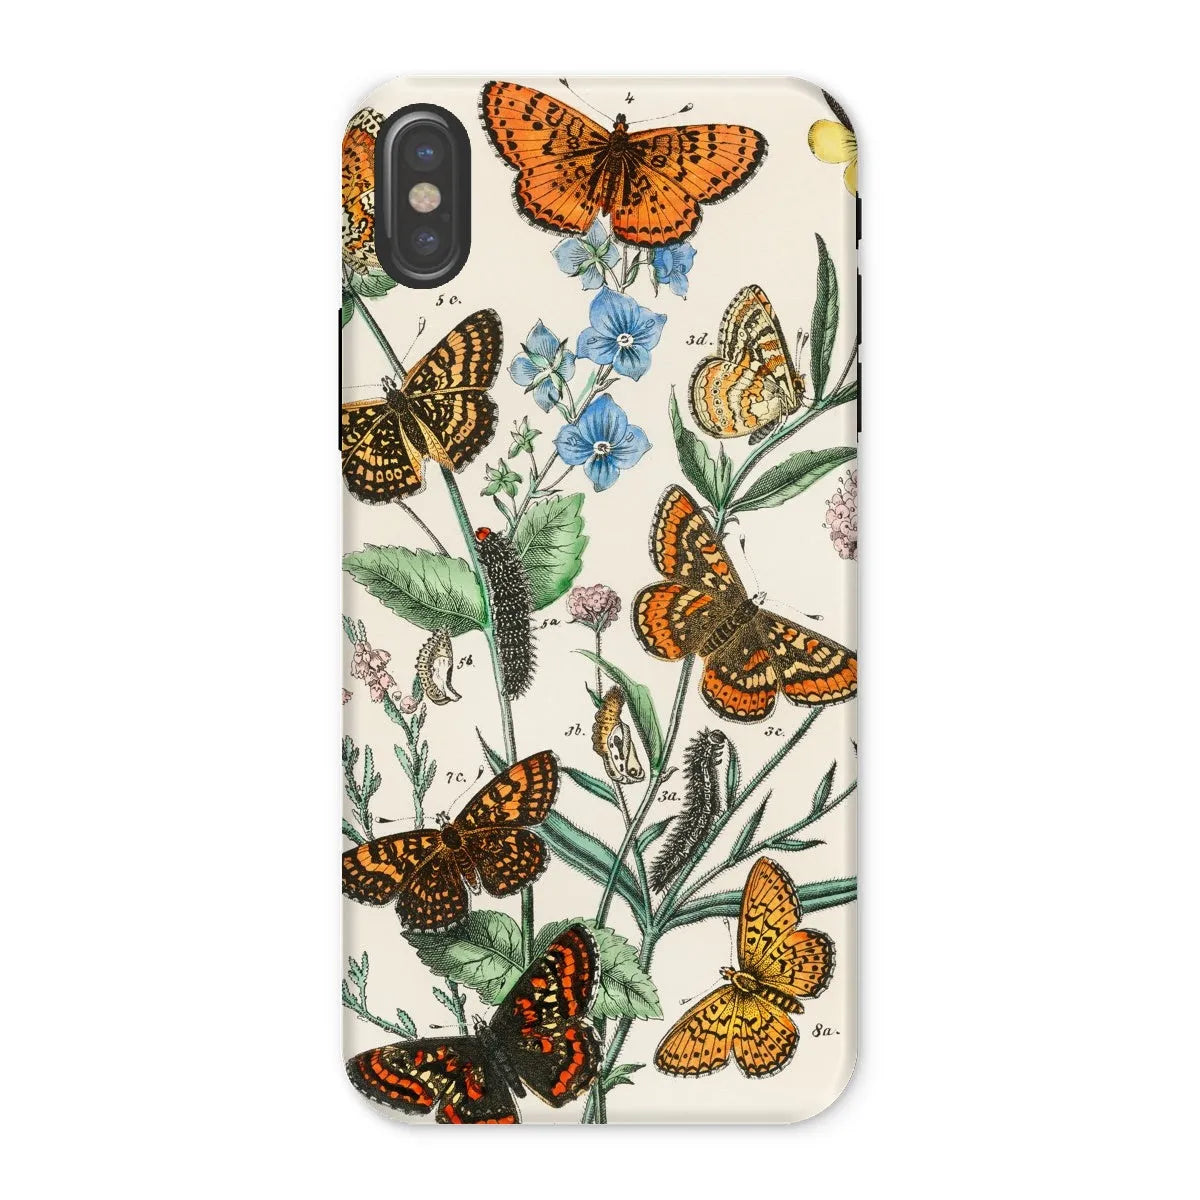 European Butterflies And Moths 2 Art Phone Case - William Forsell Kirby - Iphone x / Matte - Mobile Phone Cases